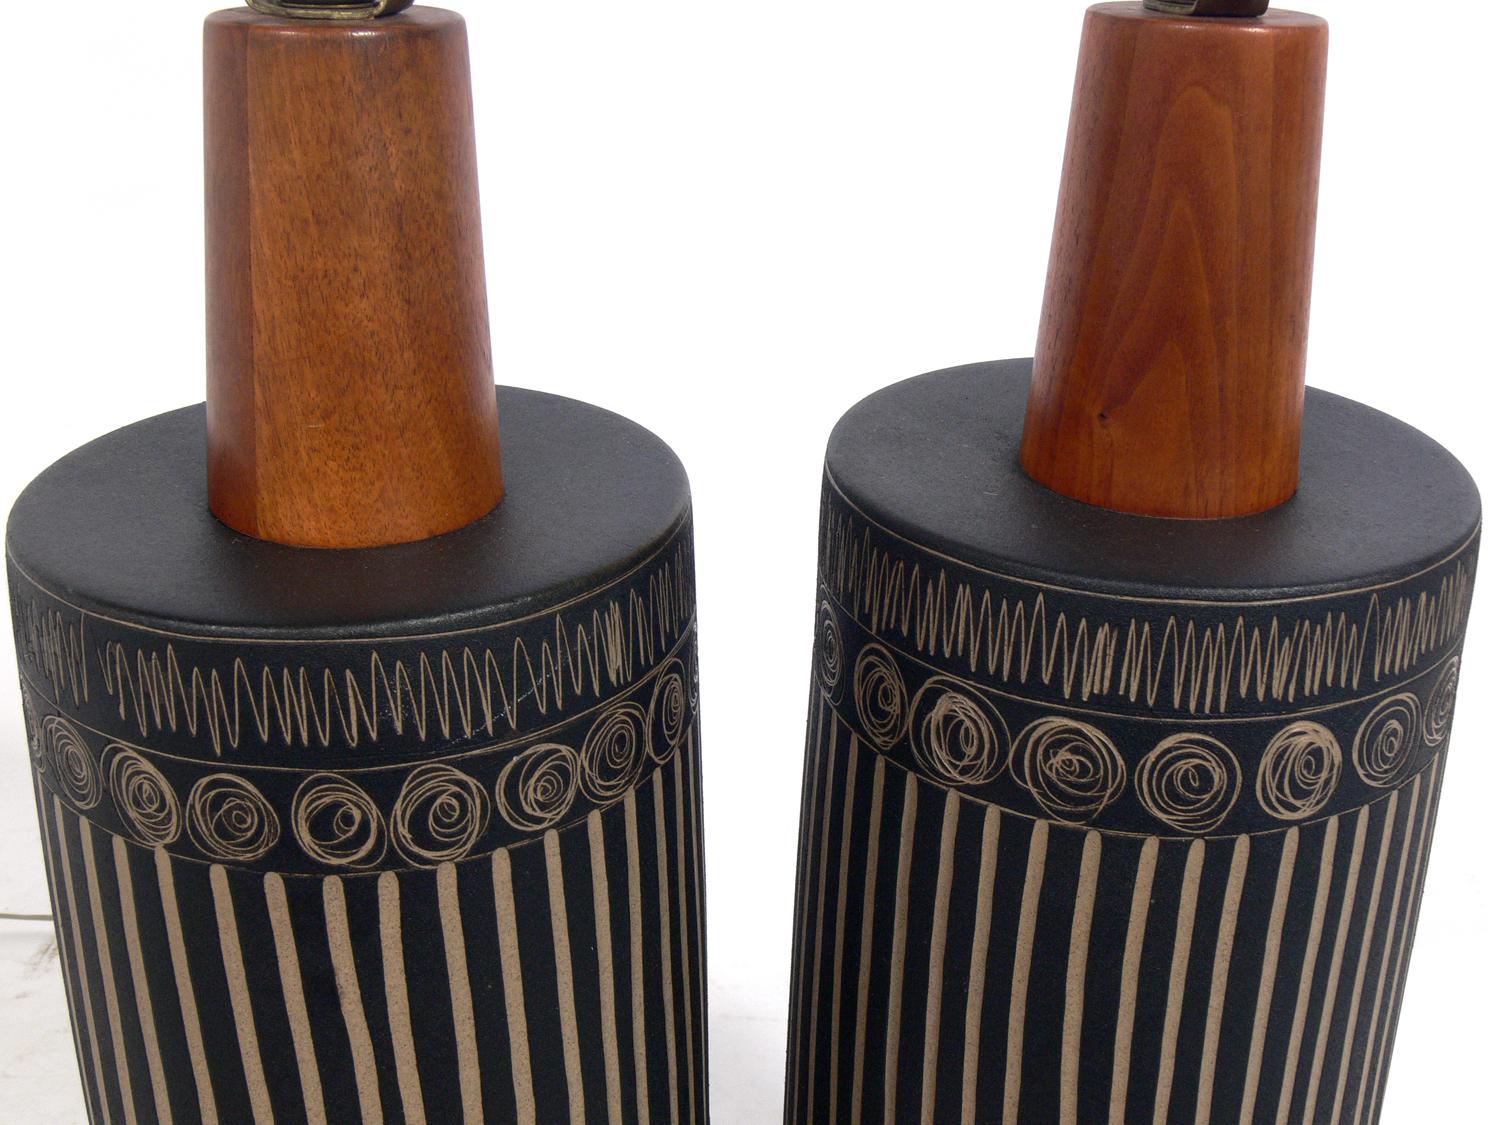 Pair of incised ceramic and walnut lamps, made by Gordon and Jane Martz for Marshall Studios, circa 1960s. Signed on the back. They retain their original walnut finials. Rewired and ready to use. The price noted below includes the shades.
  